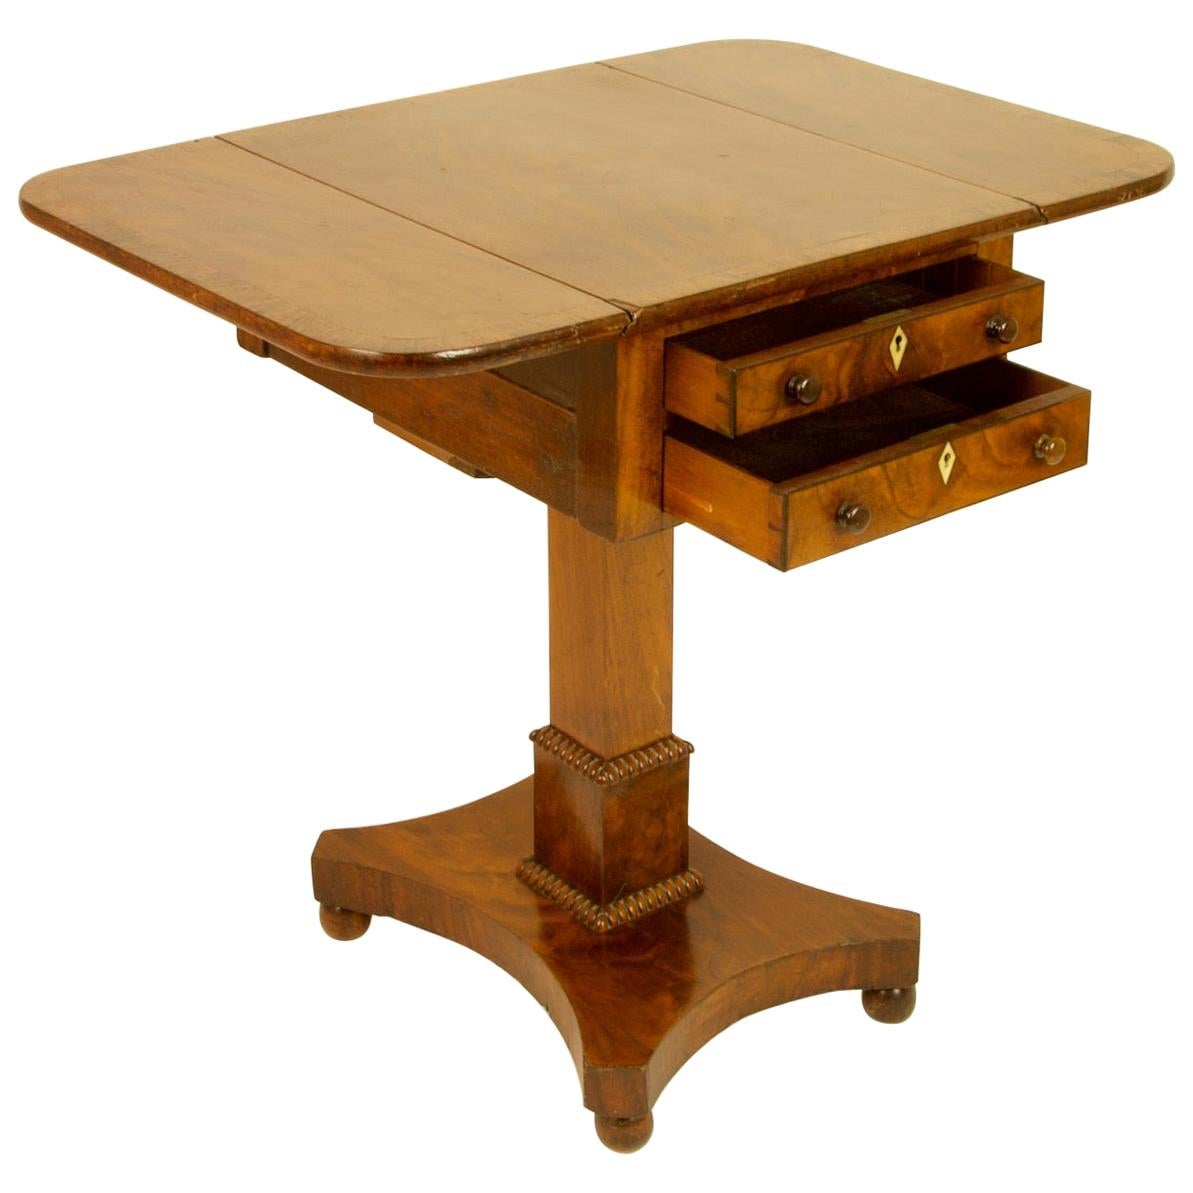 19th Century English Regency Mahogany Small Pembroke or Drop-Leaf Side Table For Sale